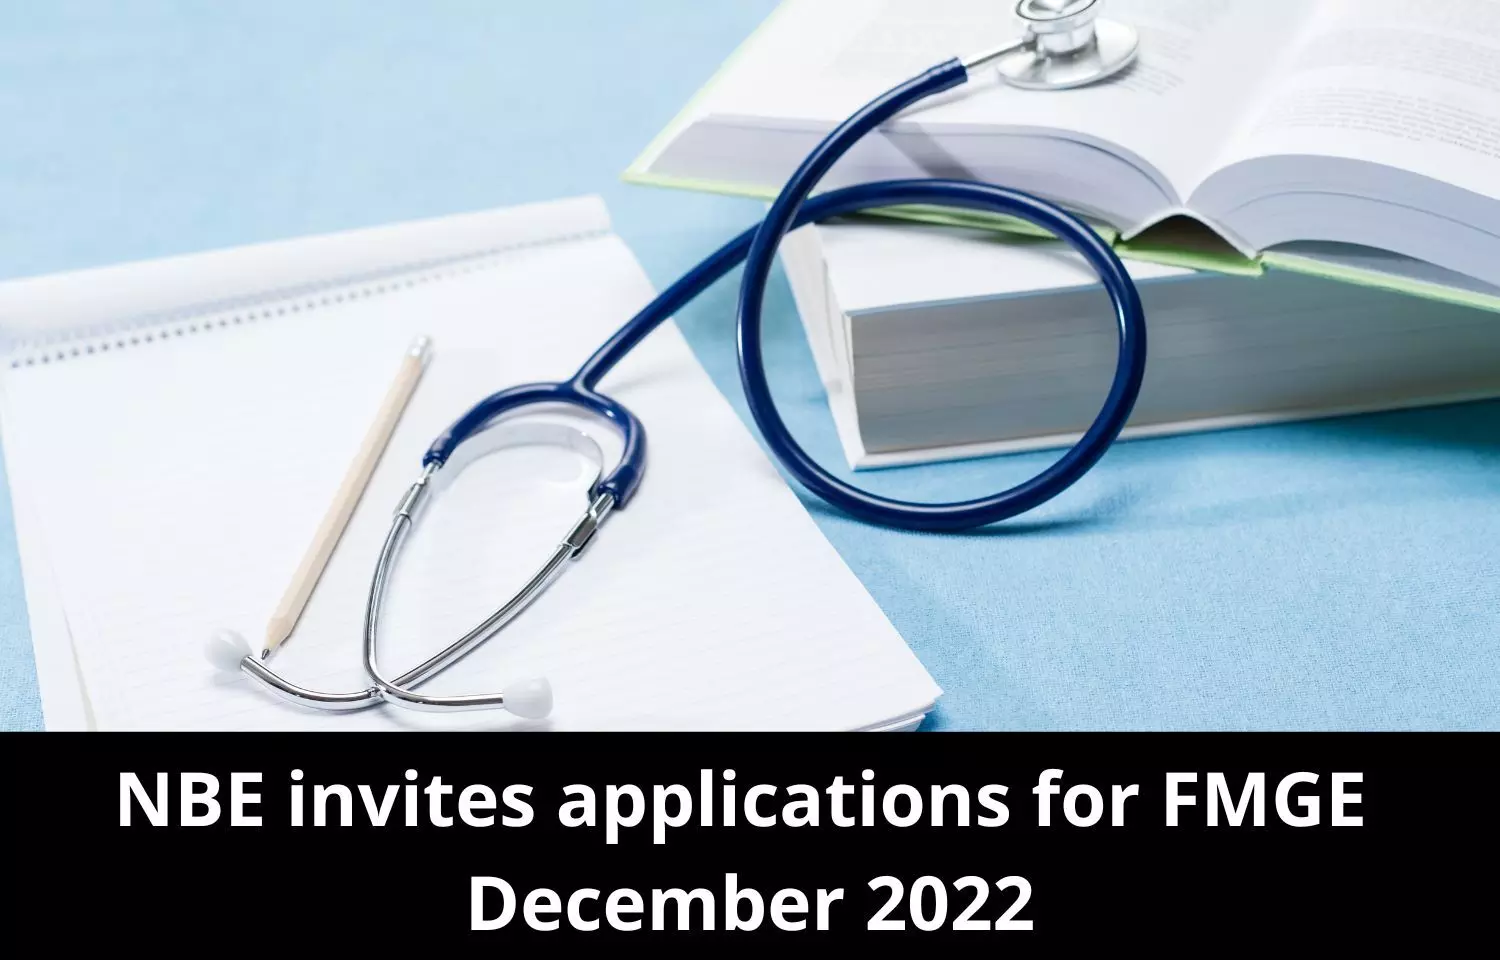 NBE invites applications for FMGE December 2022